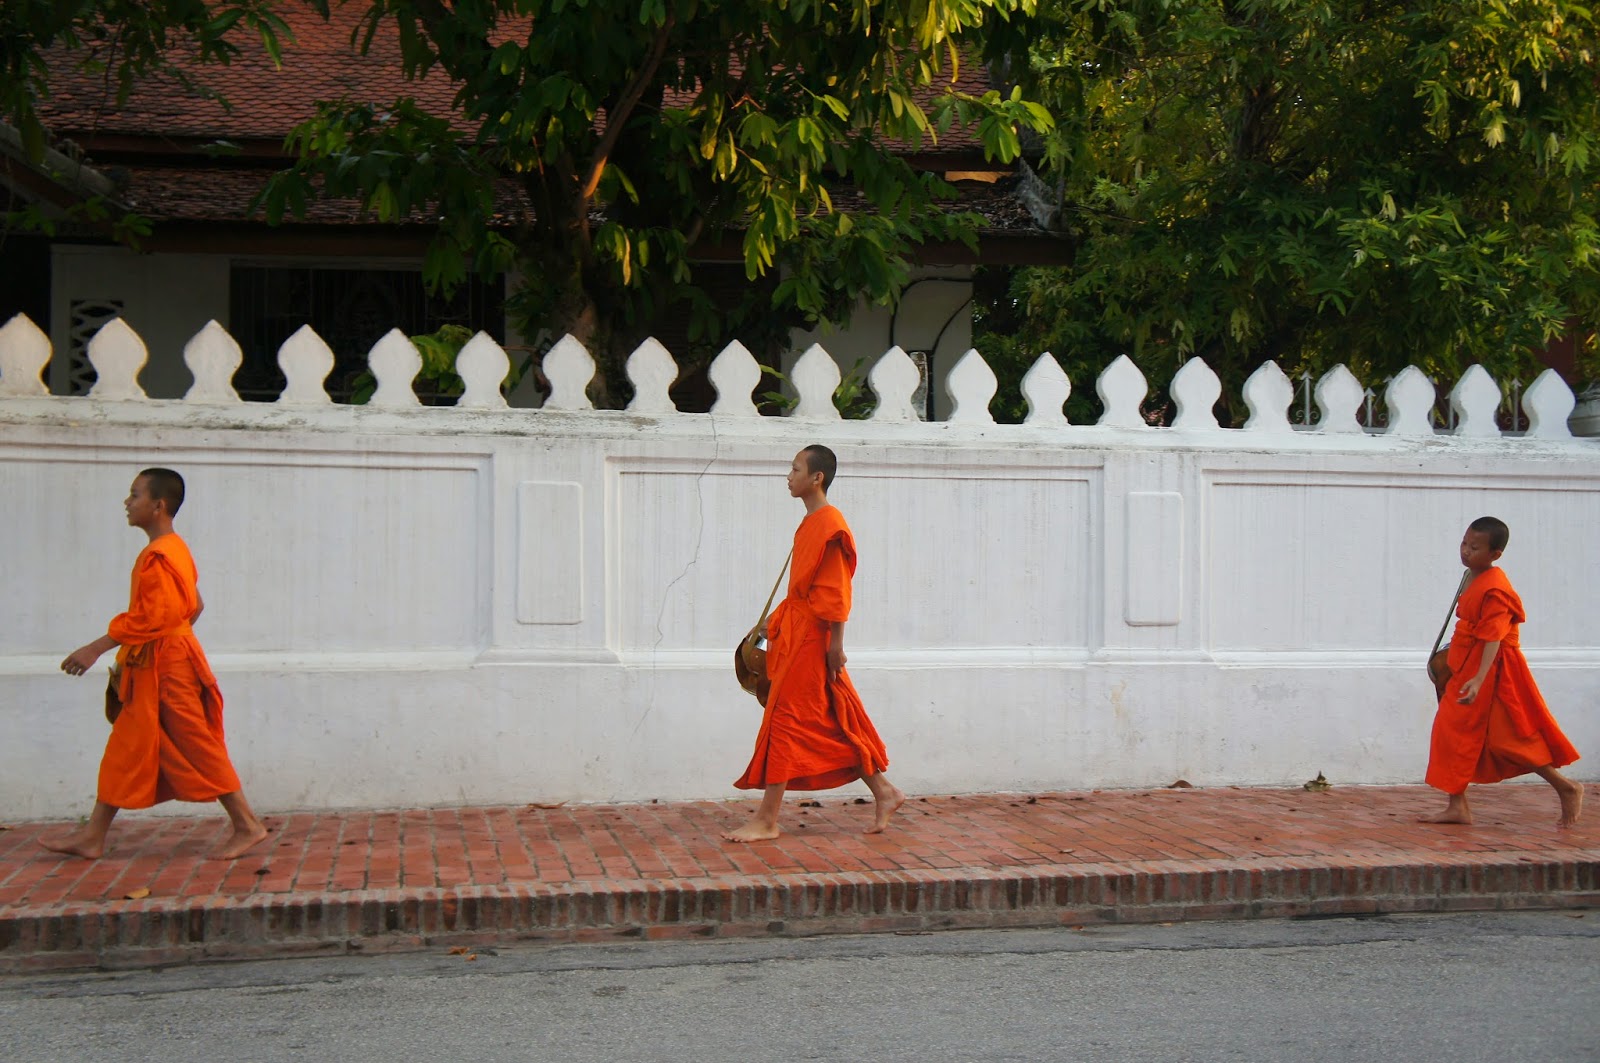 Luang Prabang - I noticed that the youngest monk usually walked at the end of their line